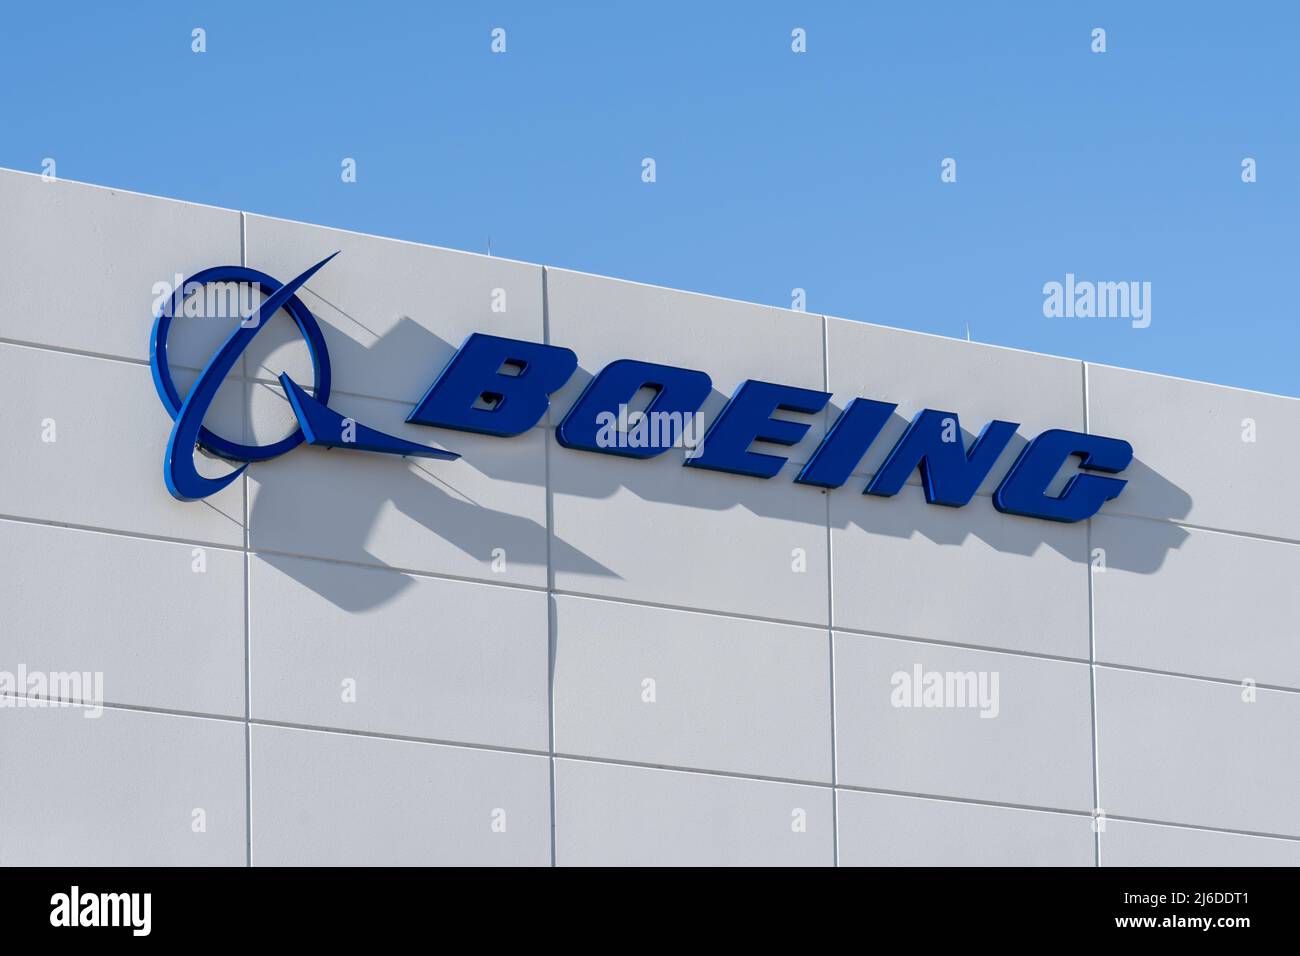 Irving, Texas, USA - March 20, 2022: Closeup of Boeing sign on the building in Irving, Texas, USA. Stock Photo